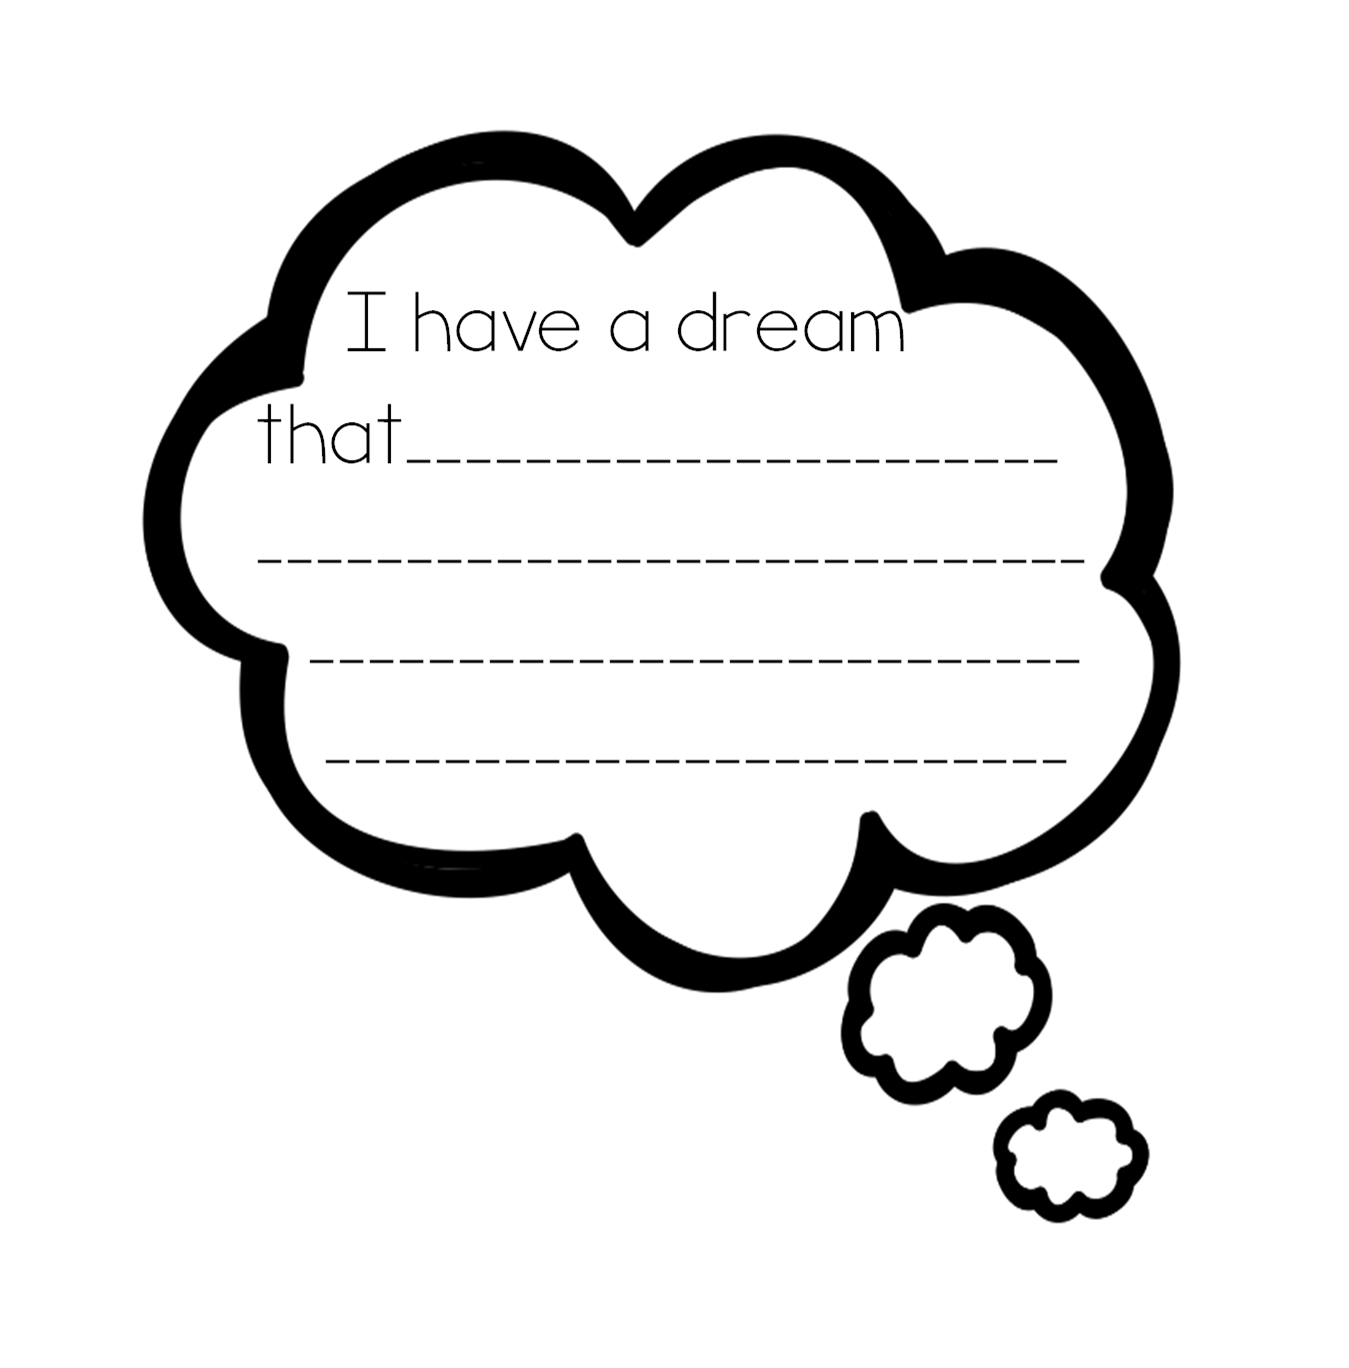 Clip Art This Thinking Bubble And Dream Bubble Clip Art This Thinking